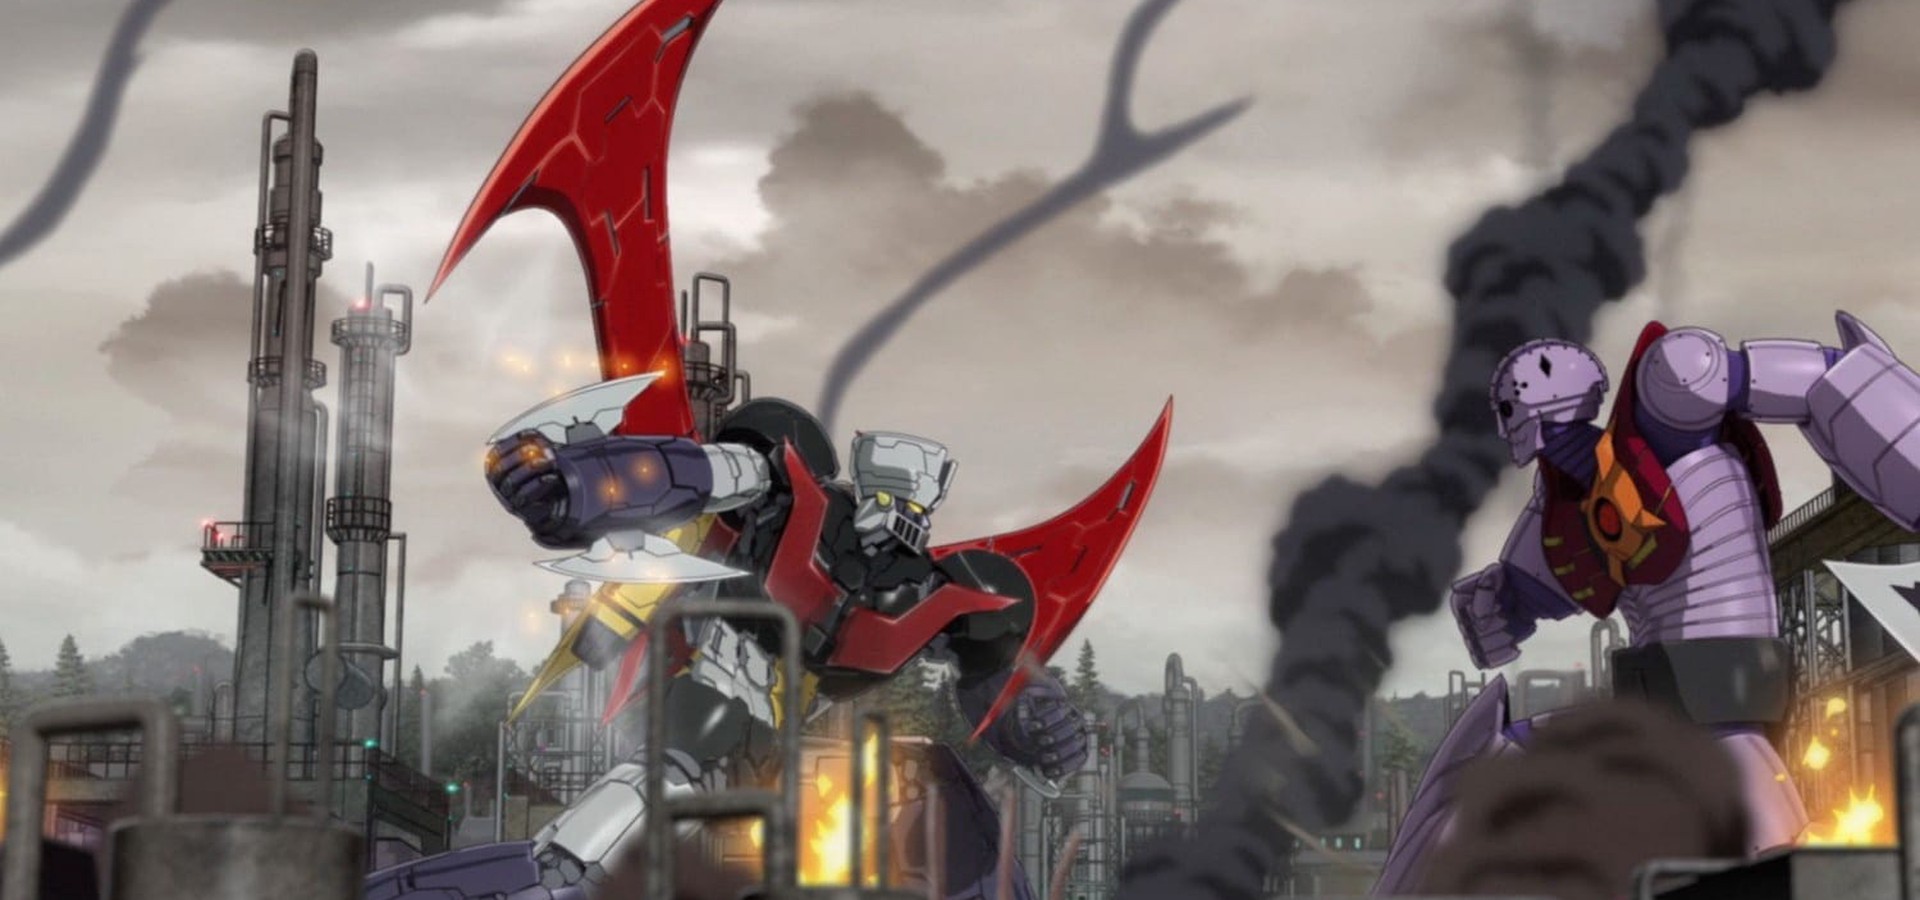 Mazinger Z Infinity Streaming Where To Watch Online